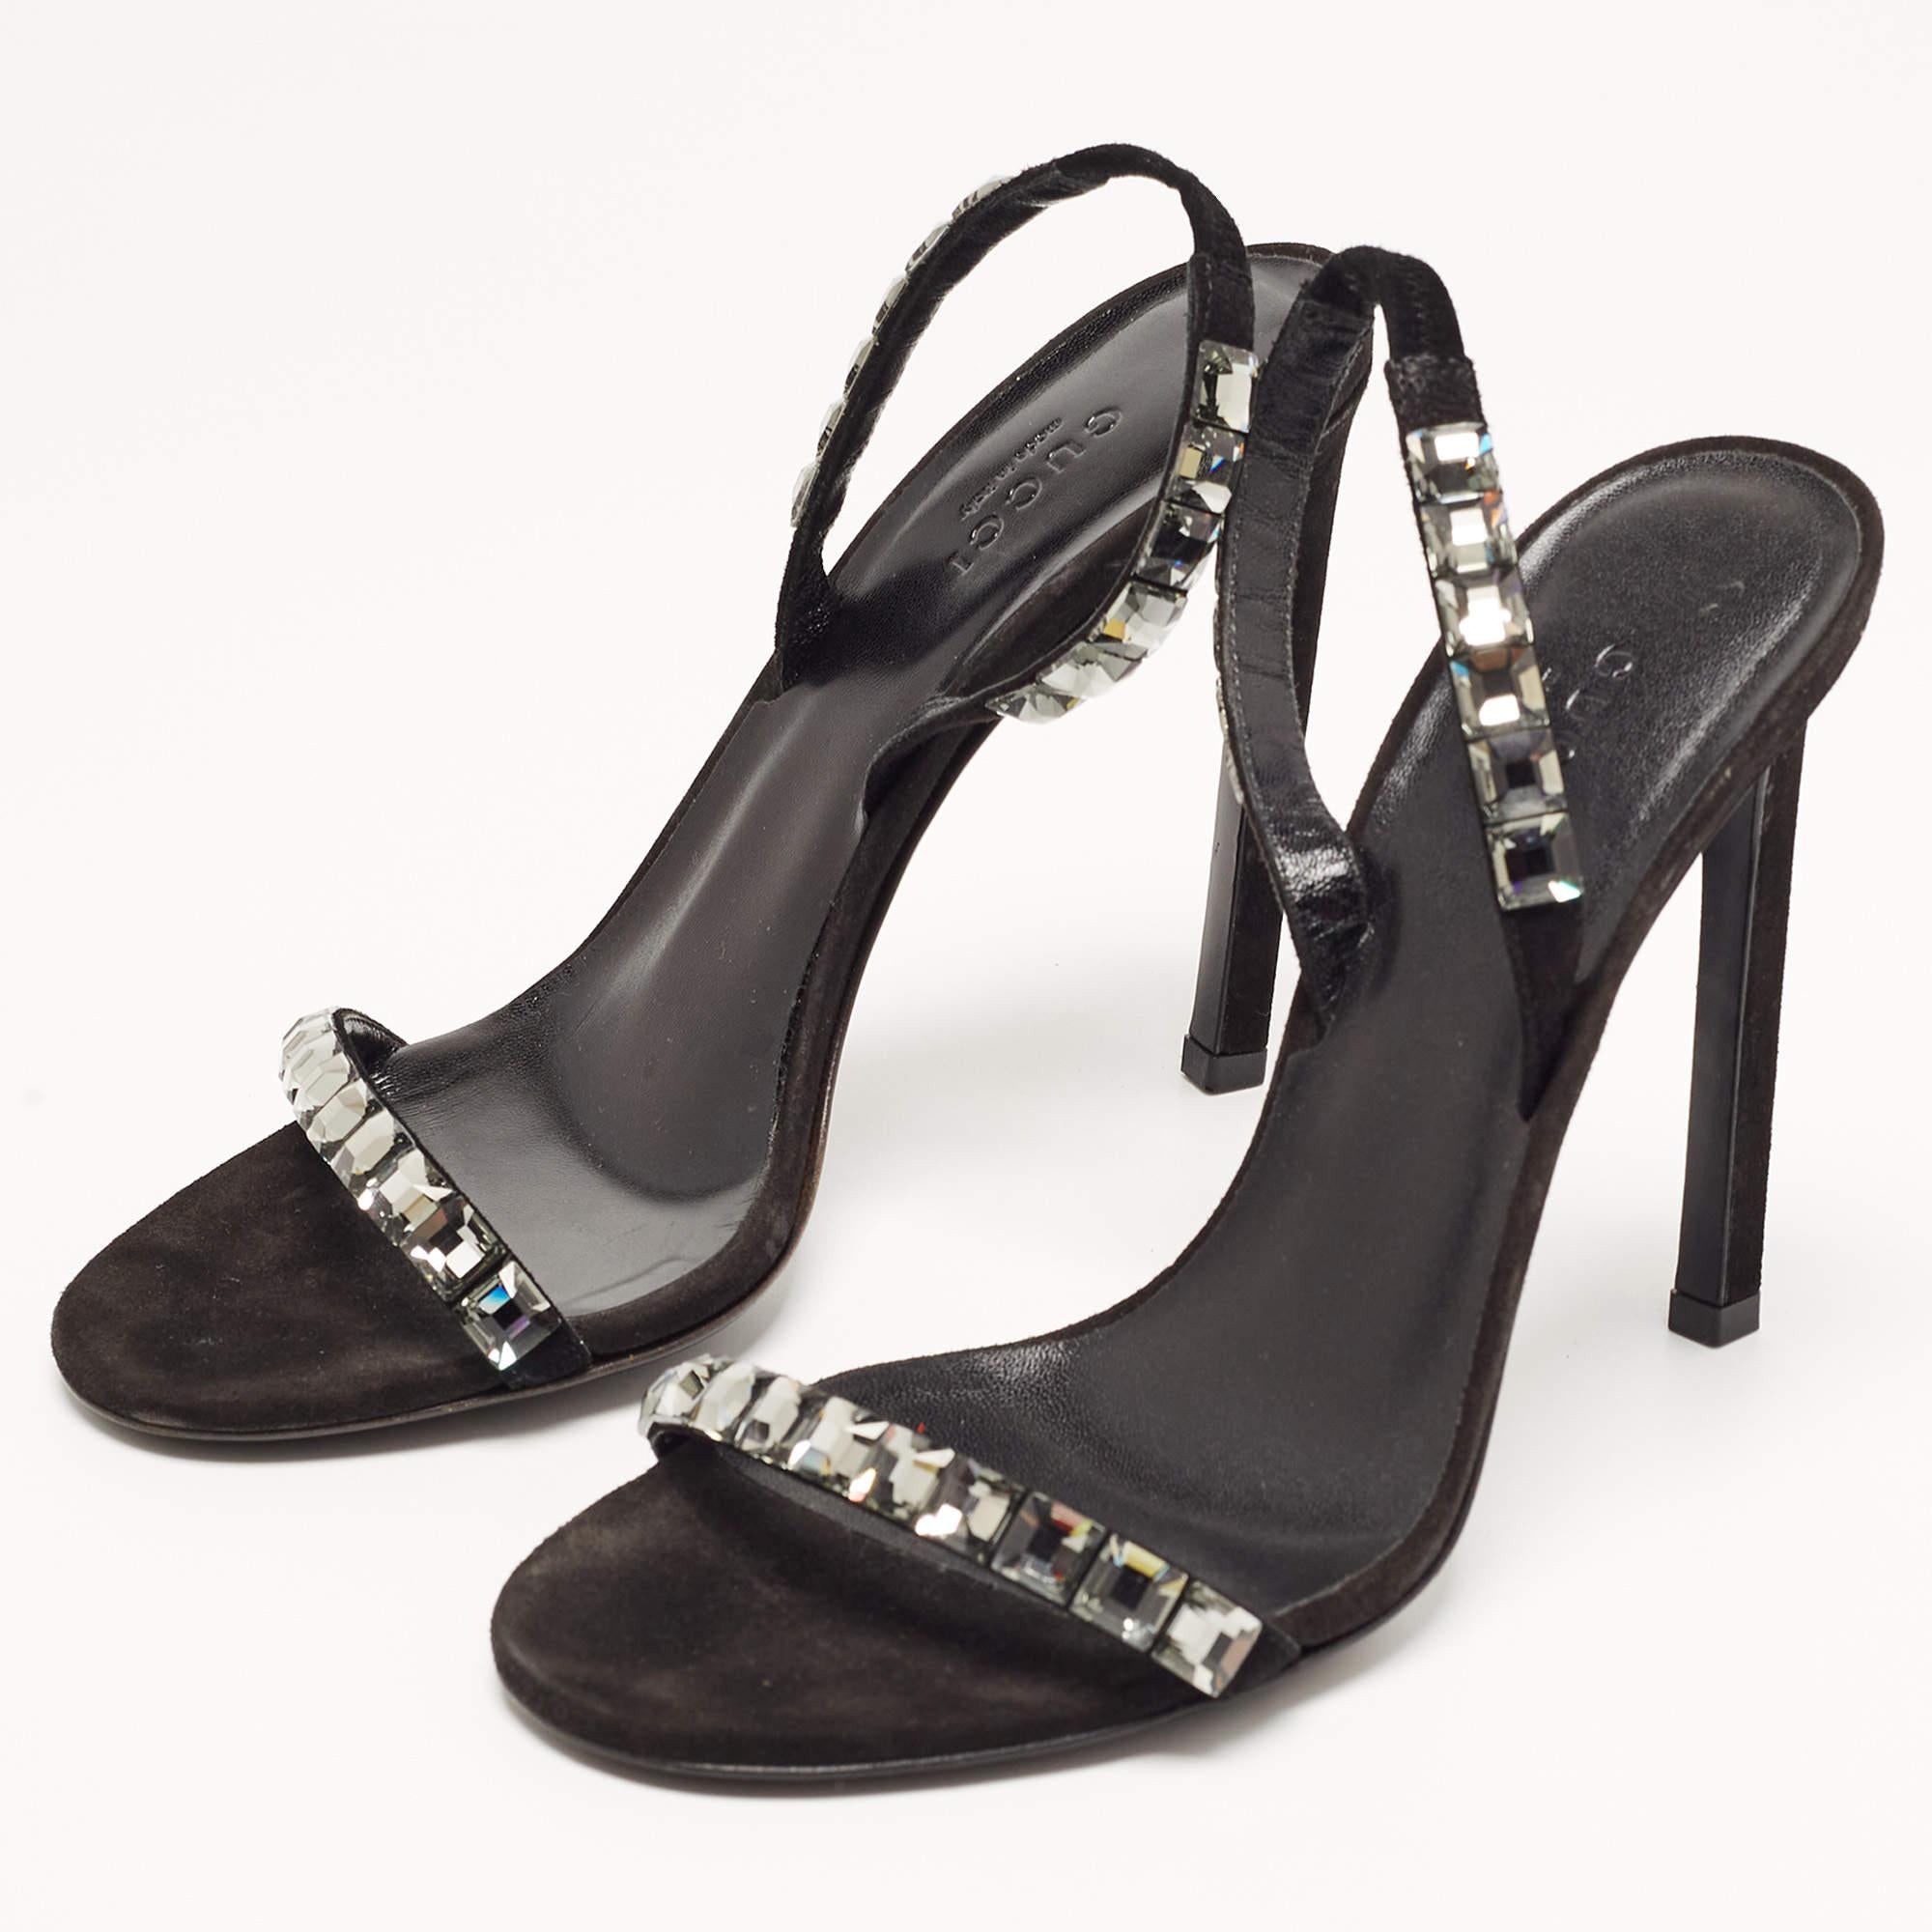 Elevate your ensemble with these Gucci black heels for women. Meticulously crafted, these exquisite heels combine luxury and comfort, creating a statement pair that's both fashionable and fabulous for every occasion.

